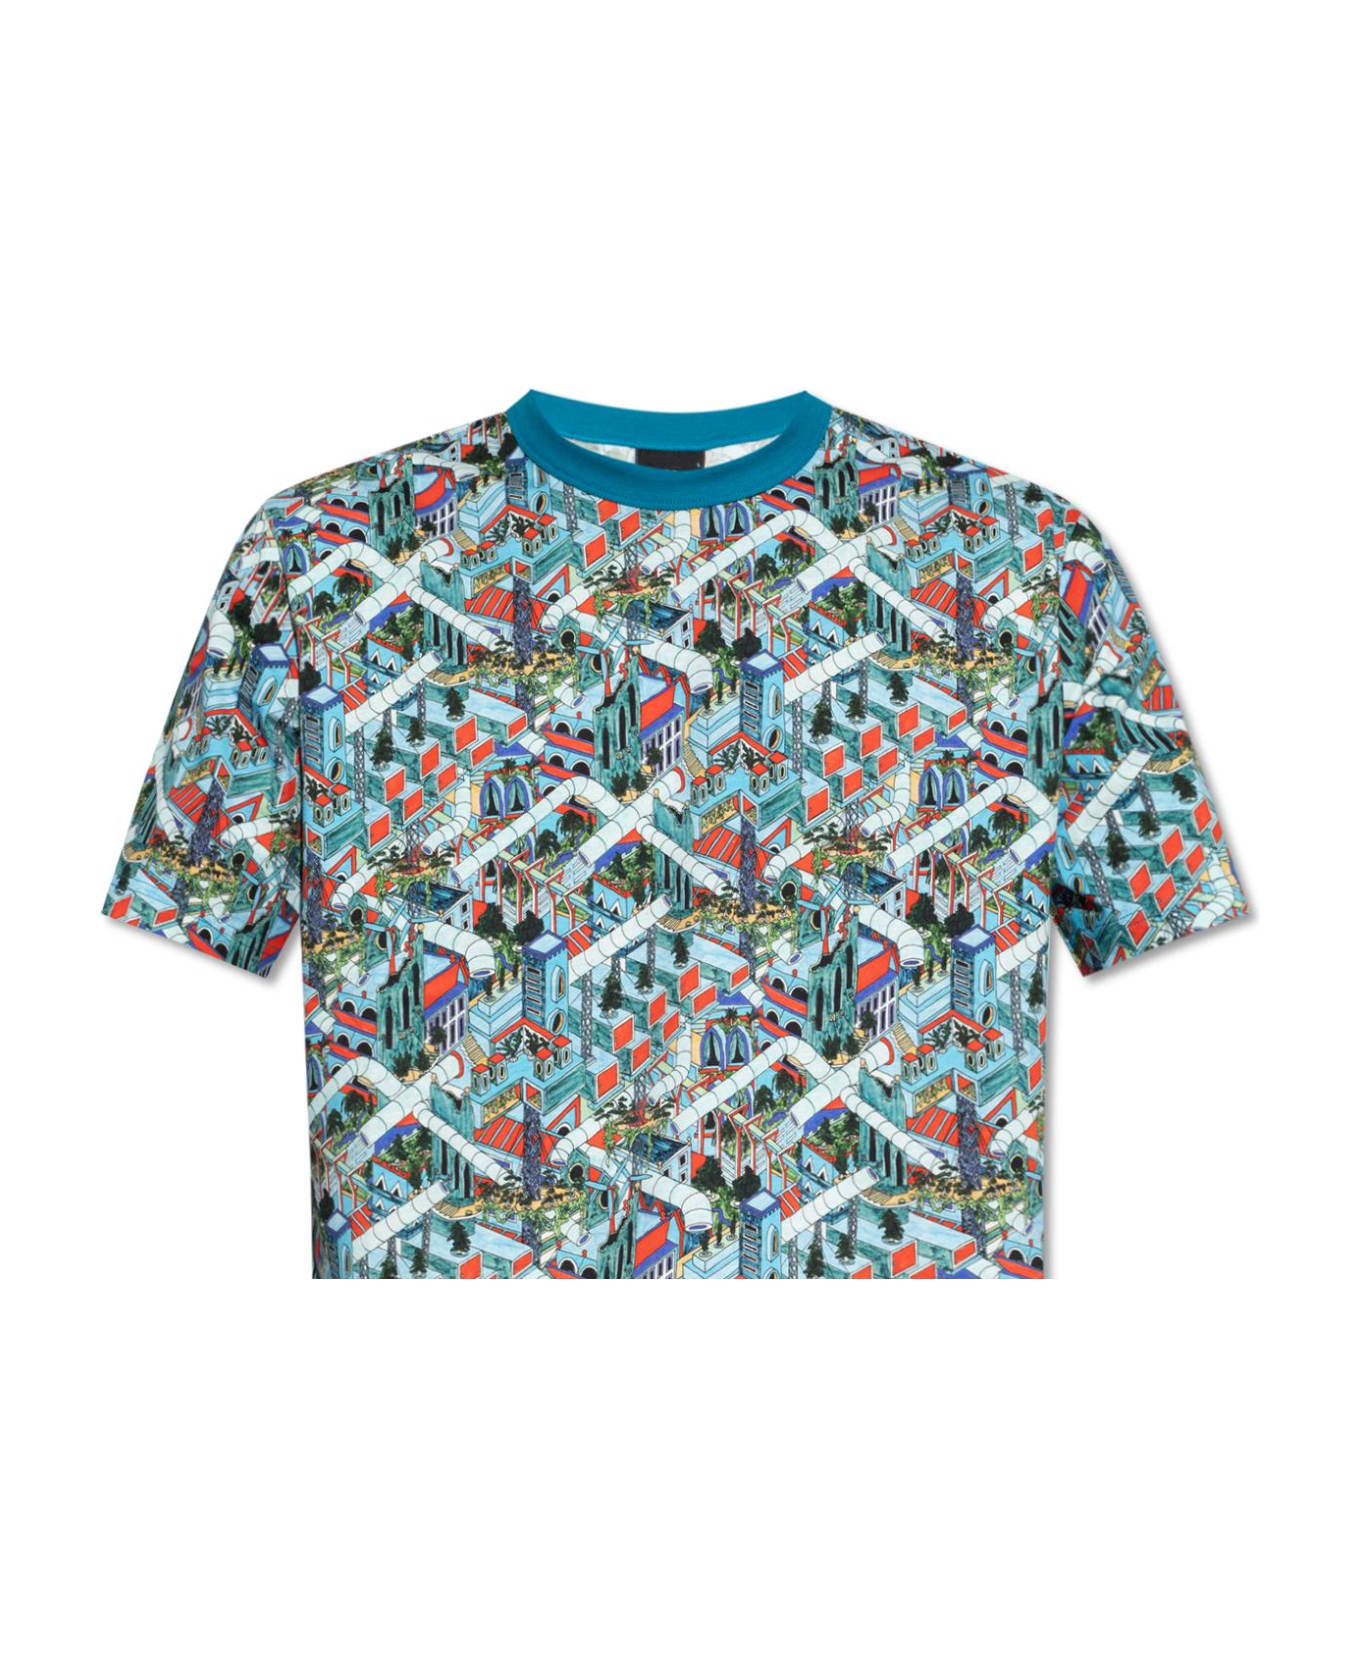 PS by Paul Smith Ps Paul Smith Patterned T-shirt - Blue シャツ